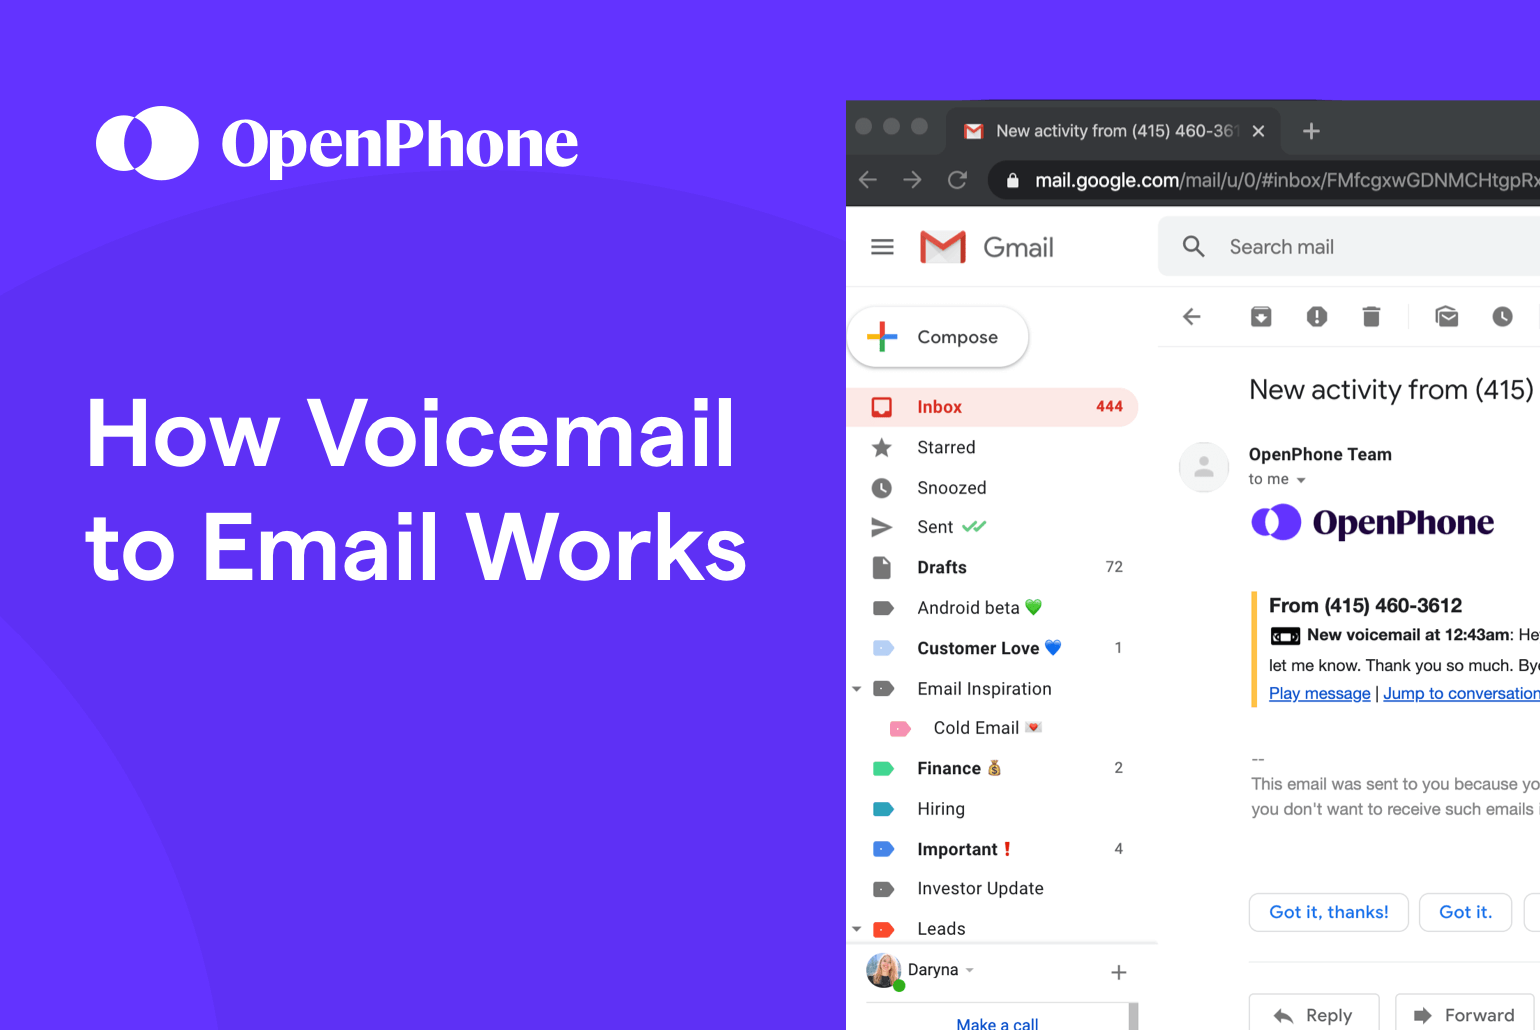 how voicemails to email works by OpenPhone